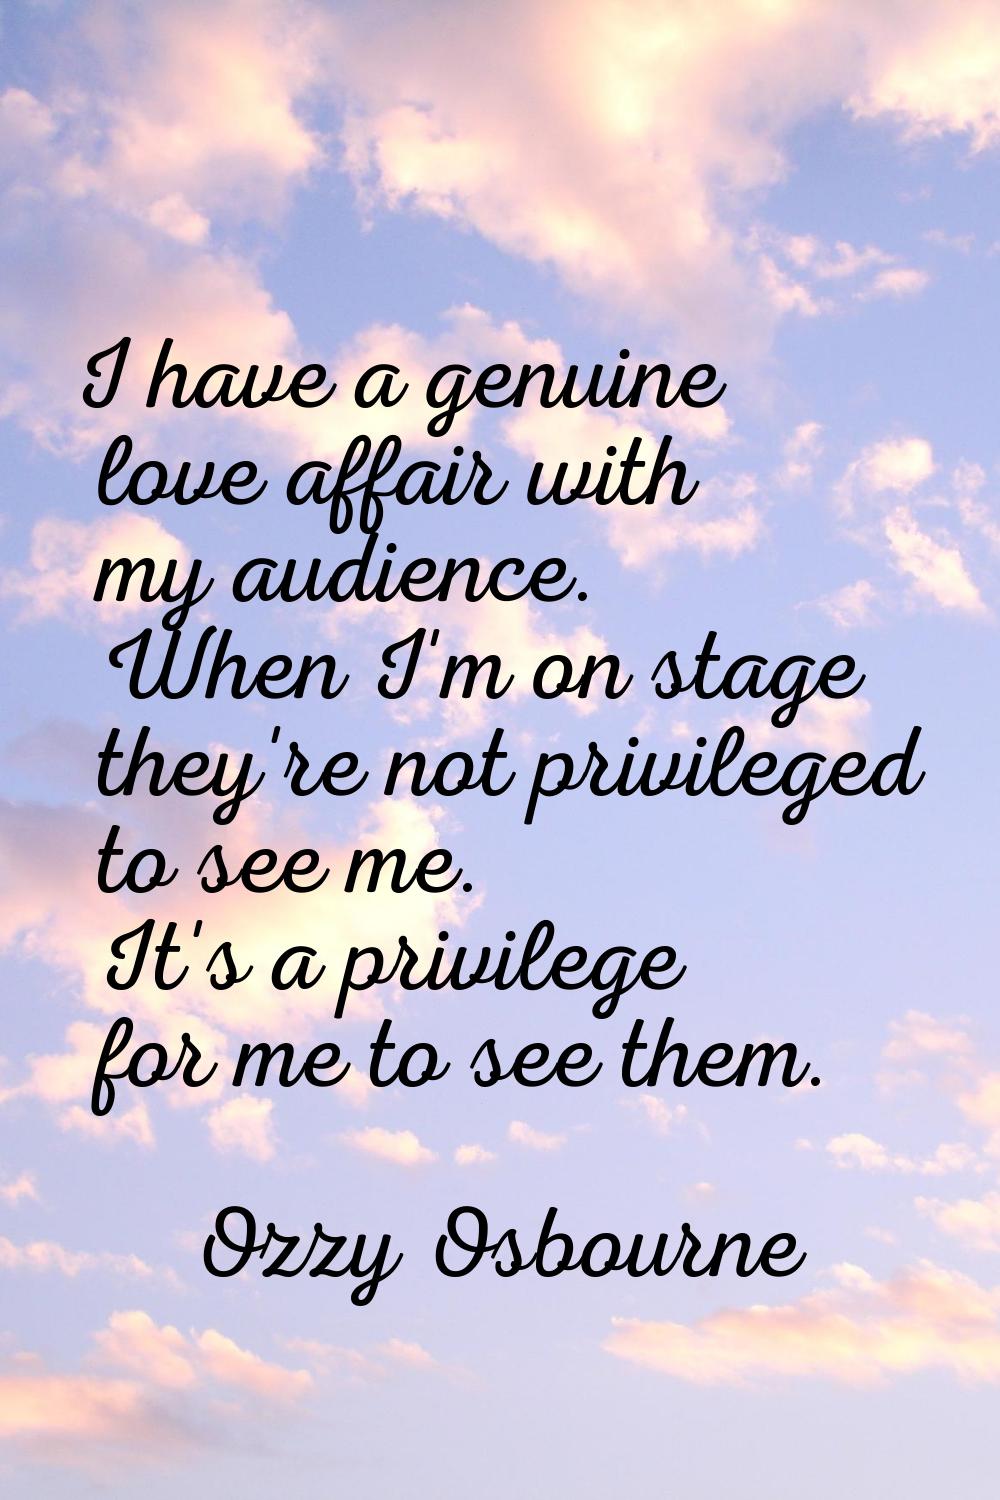 I have a genuine love affair with my audience. When I'm on stage they're not privileged to see me. 